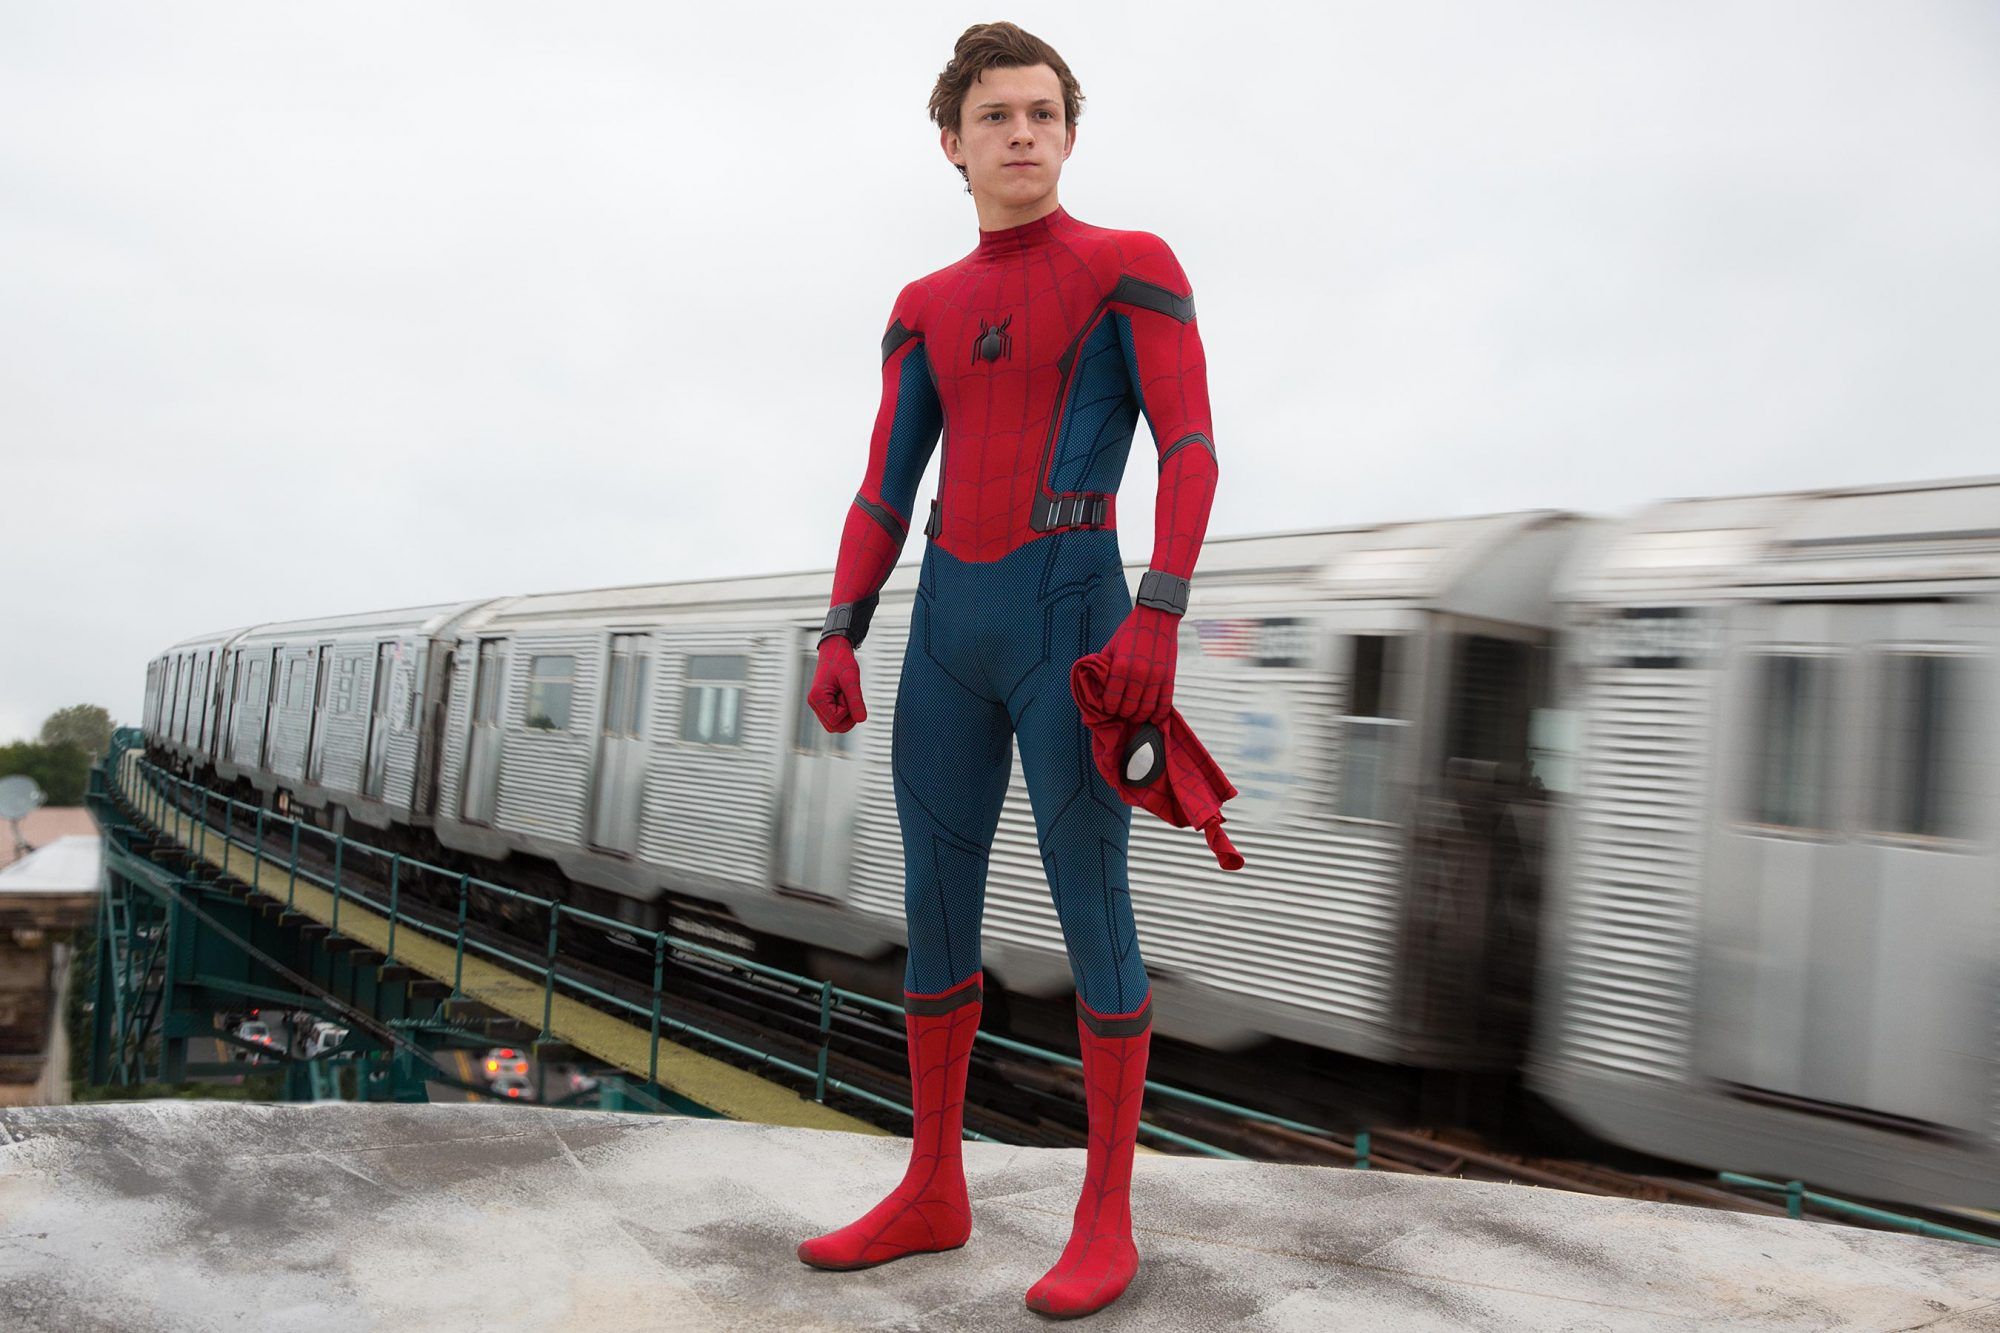 TomHolland is uncovered its entire headmask and is standing in front of a moving train on a railroad track